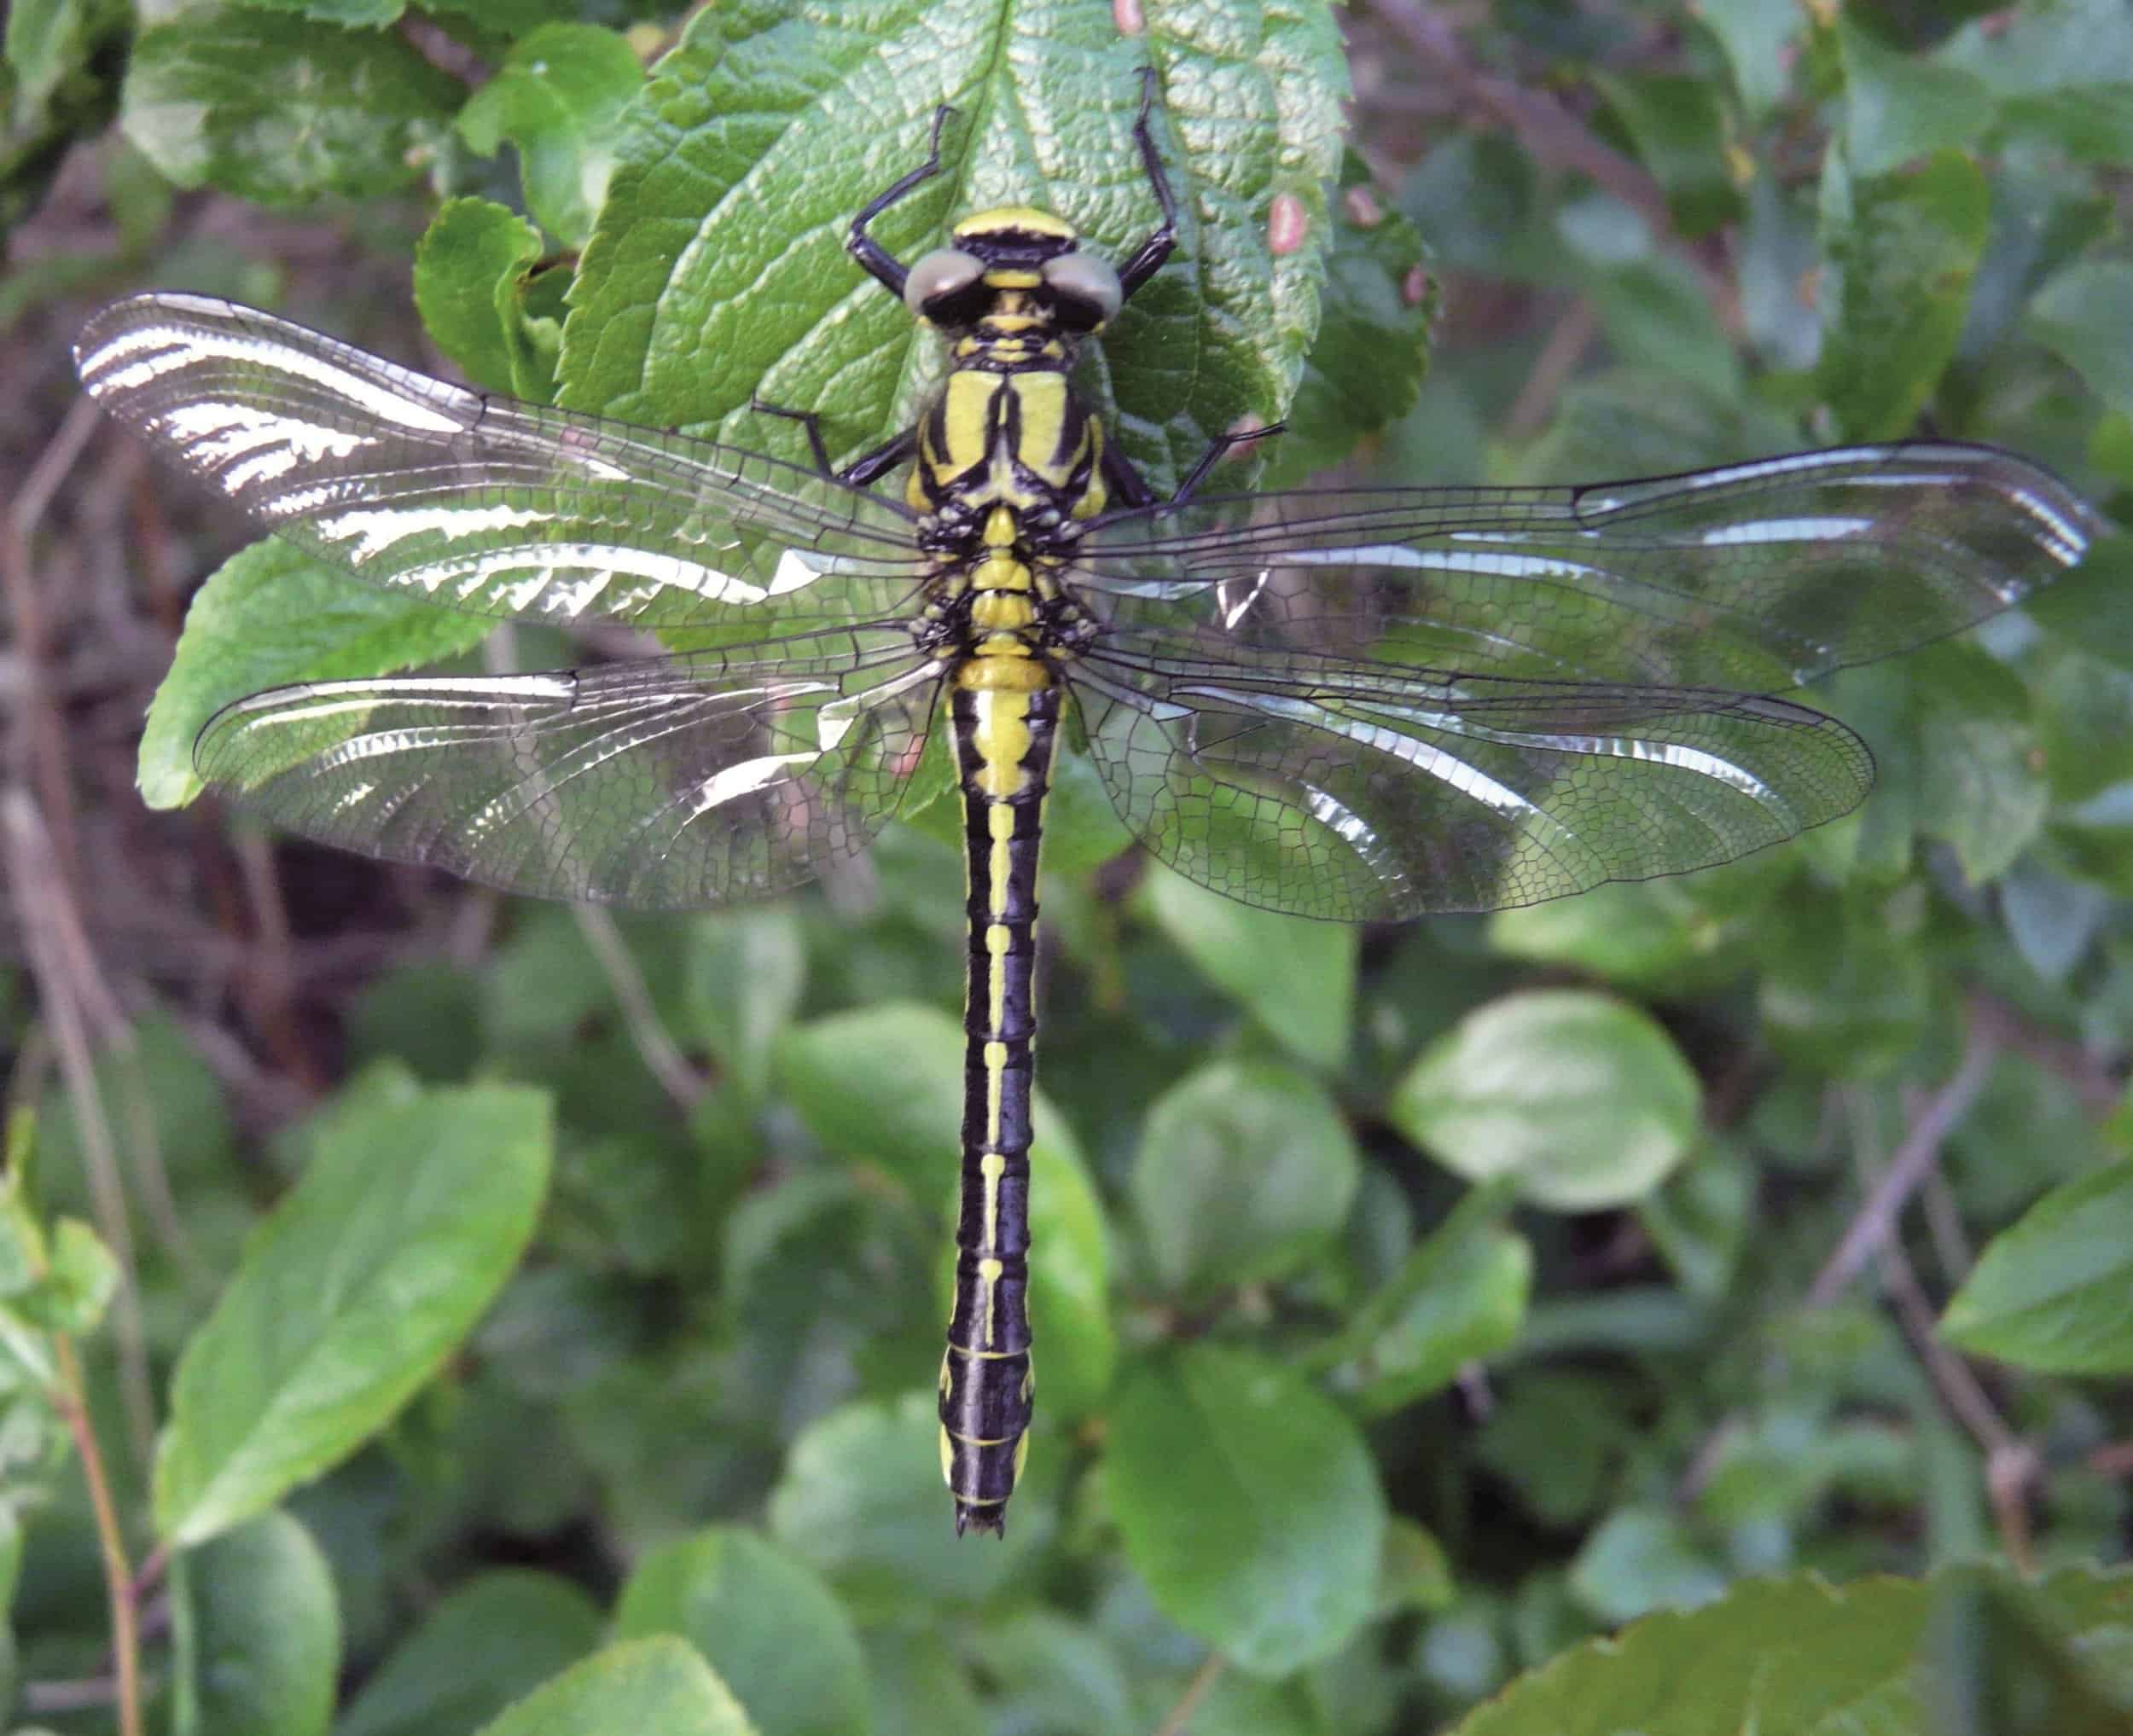 A dragonfly on a plant